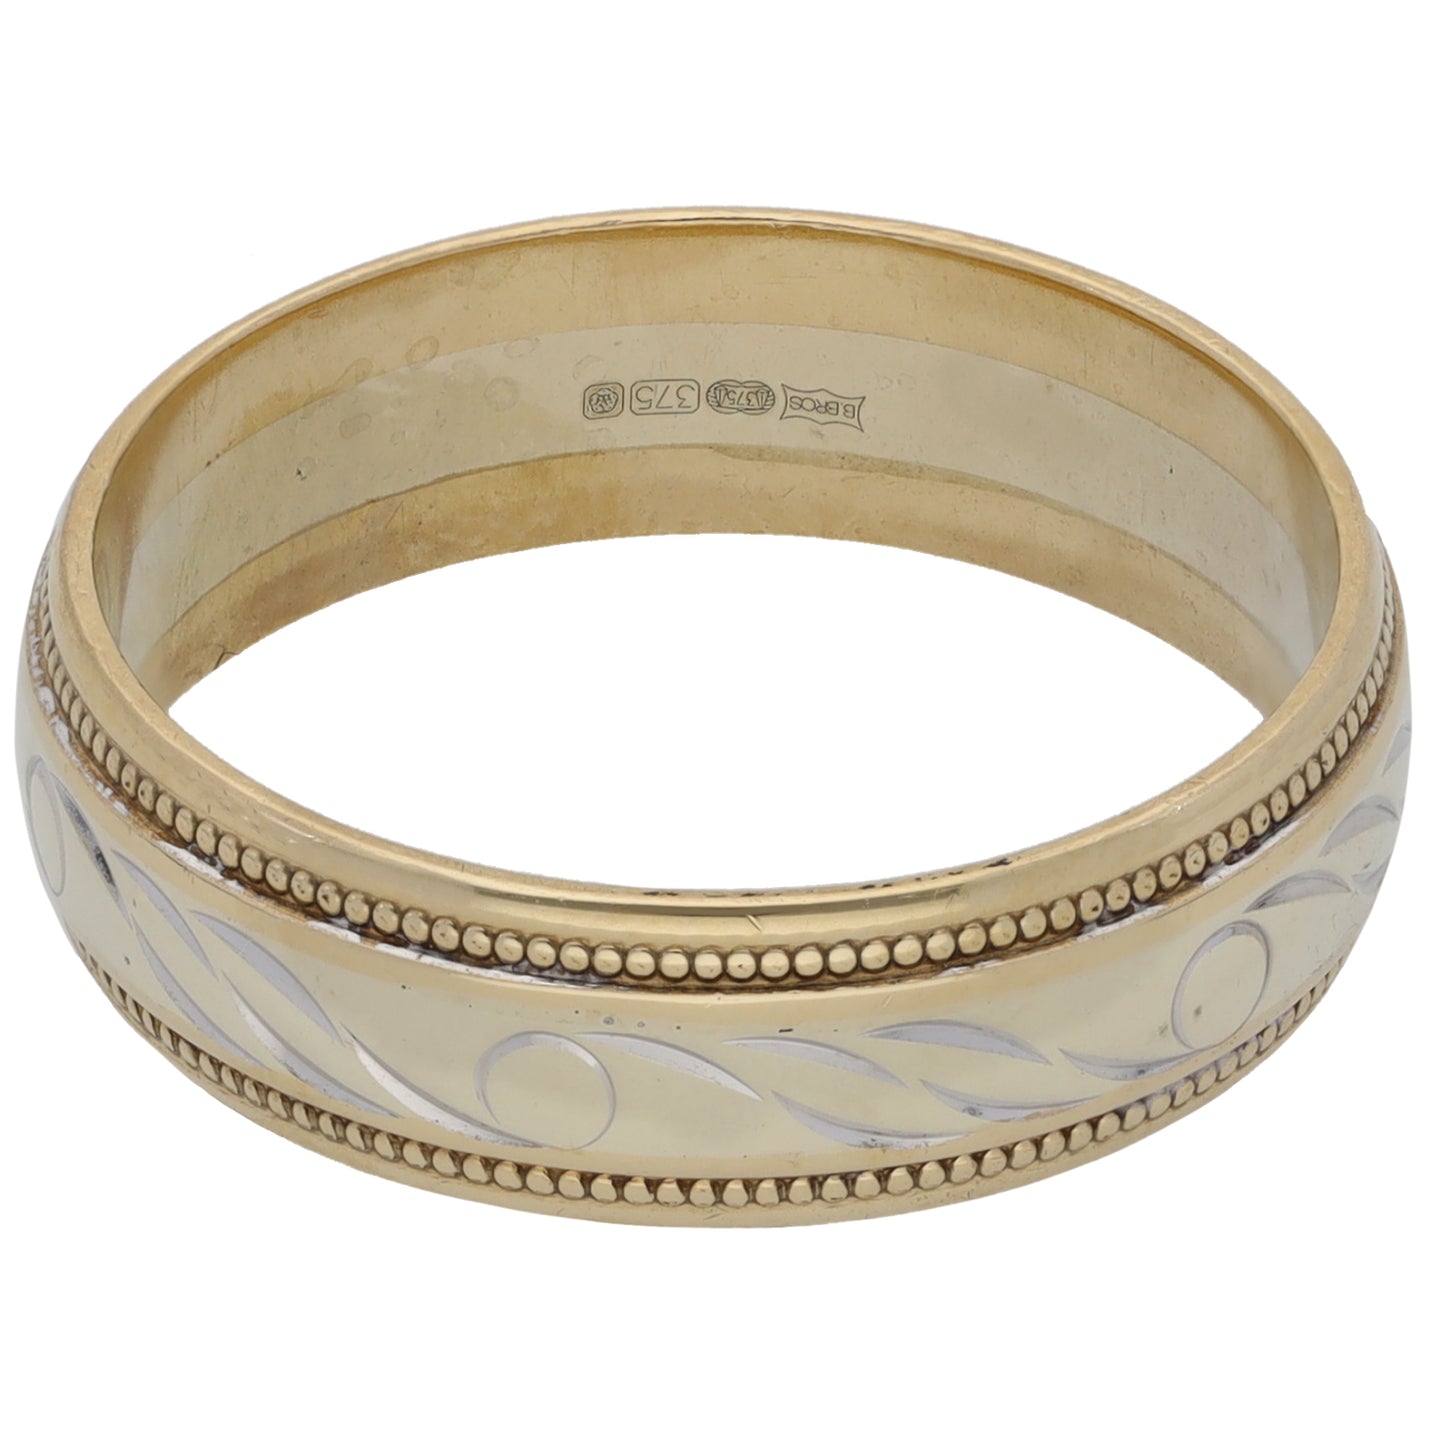 9ct Bi-Colour Gold Patterned Wedding Ring Size S